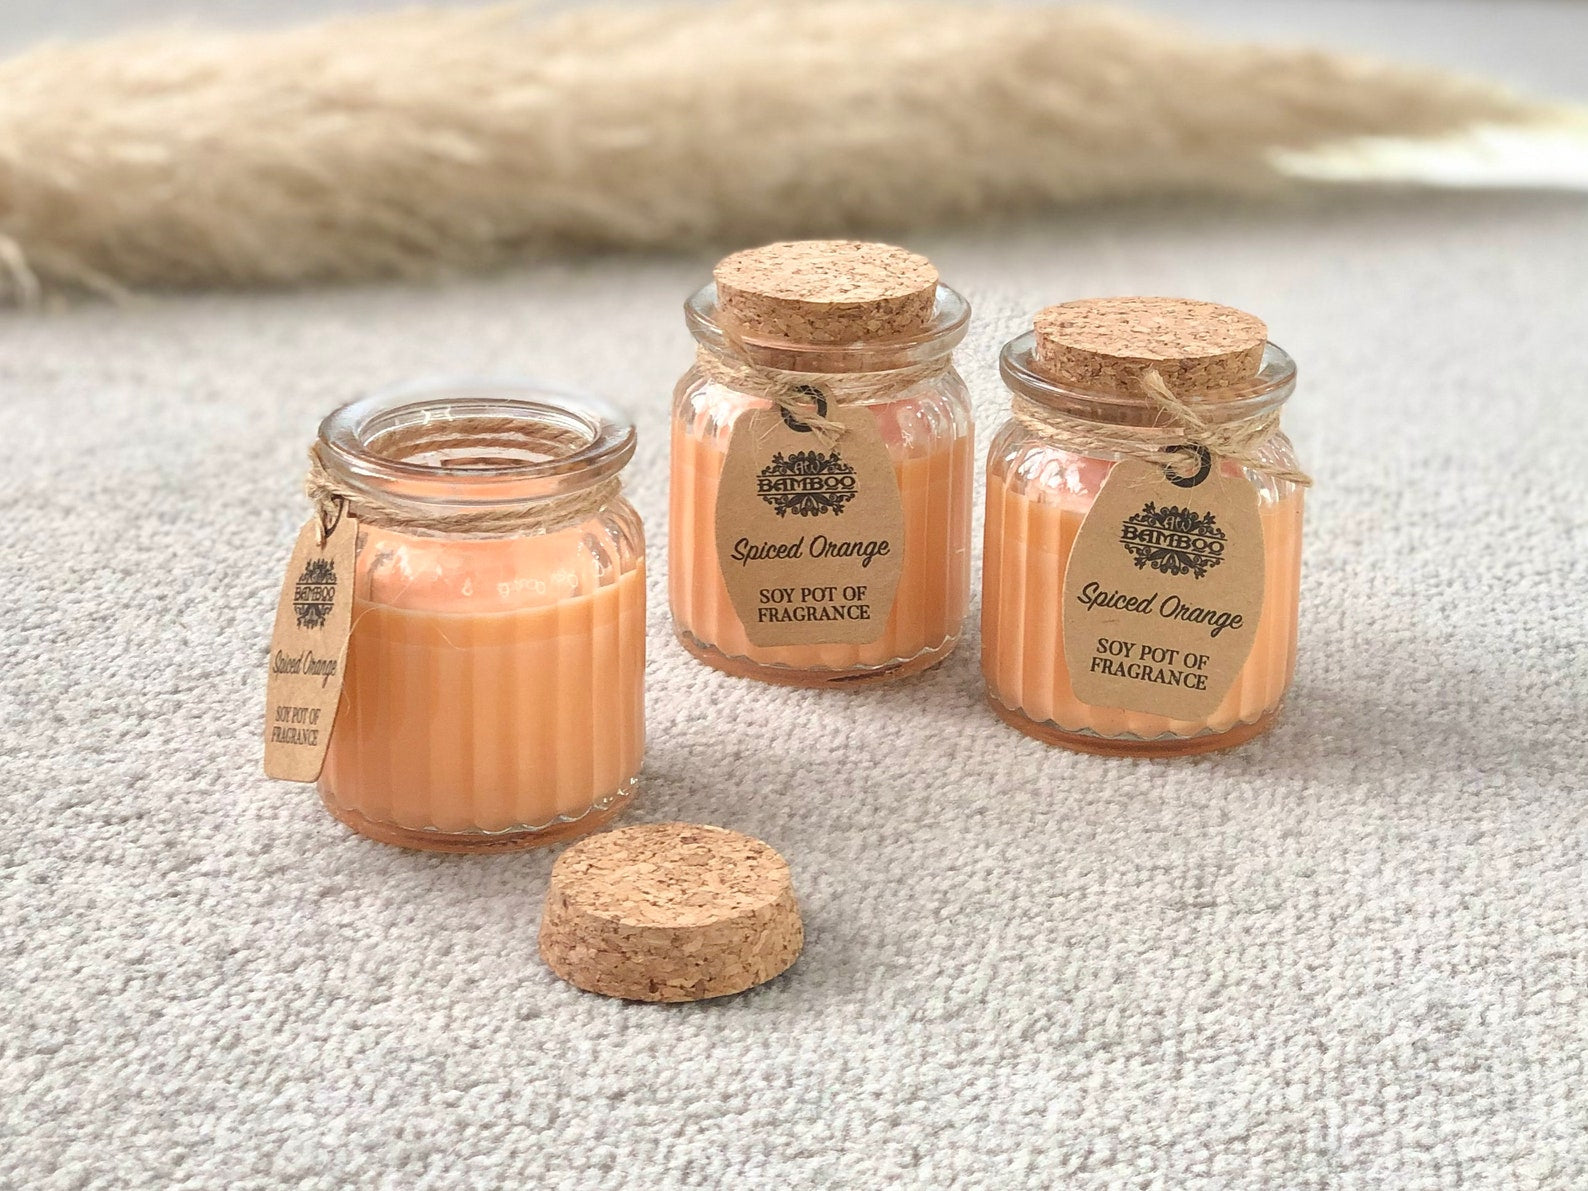 Spiced Orange Soy Pot Candles - Festive Christmas Candle